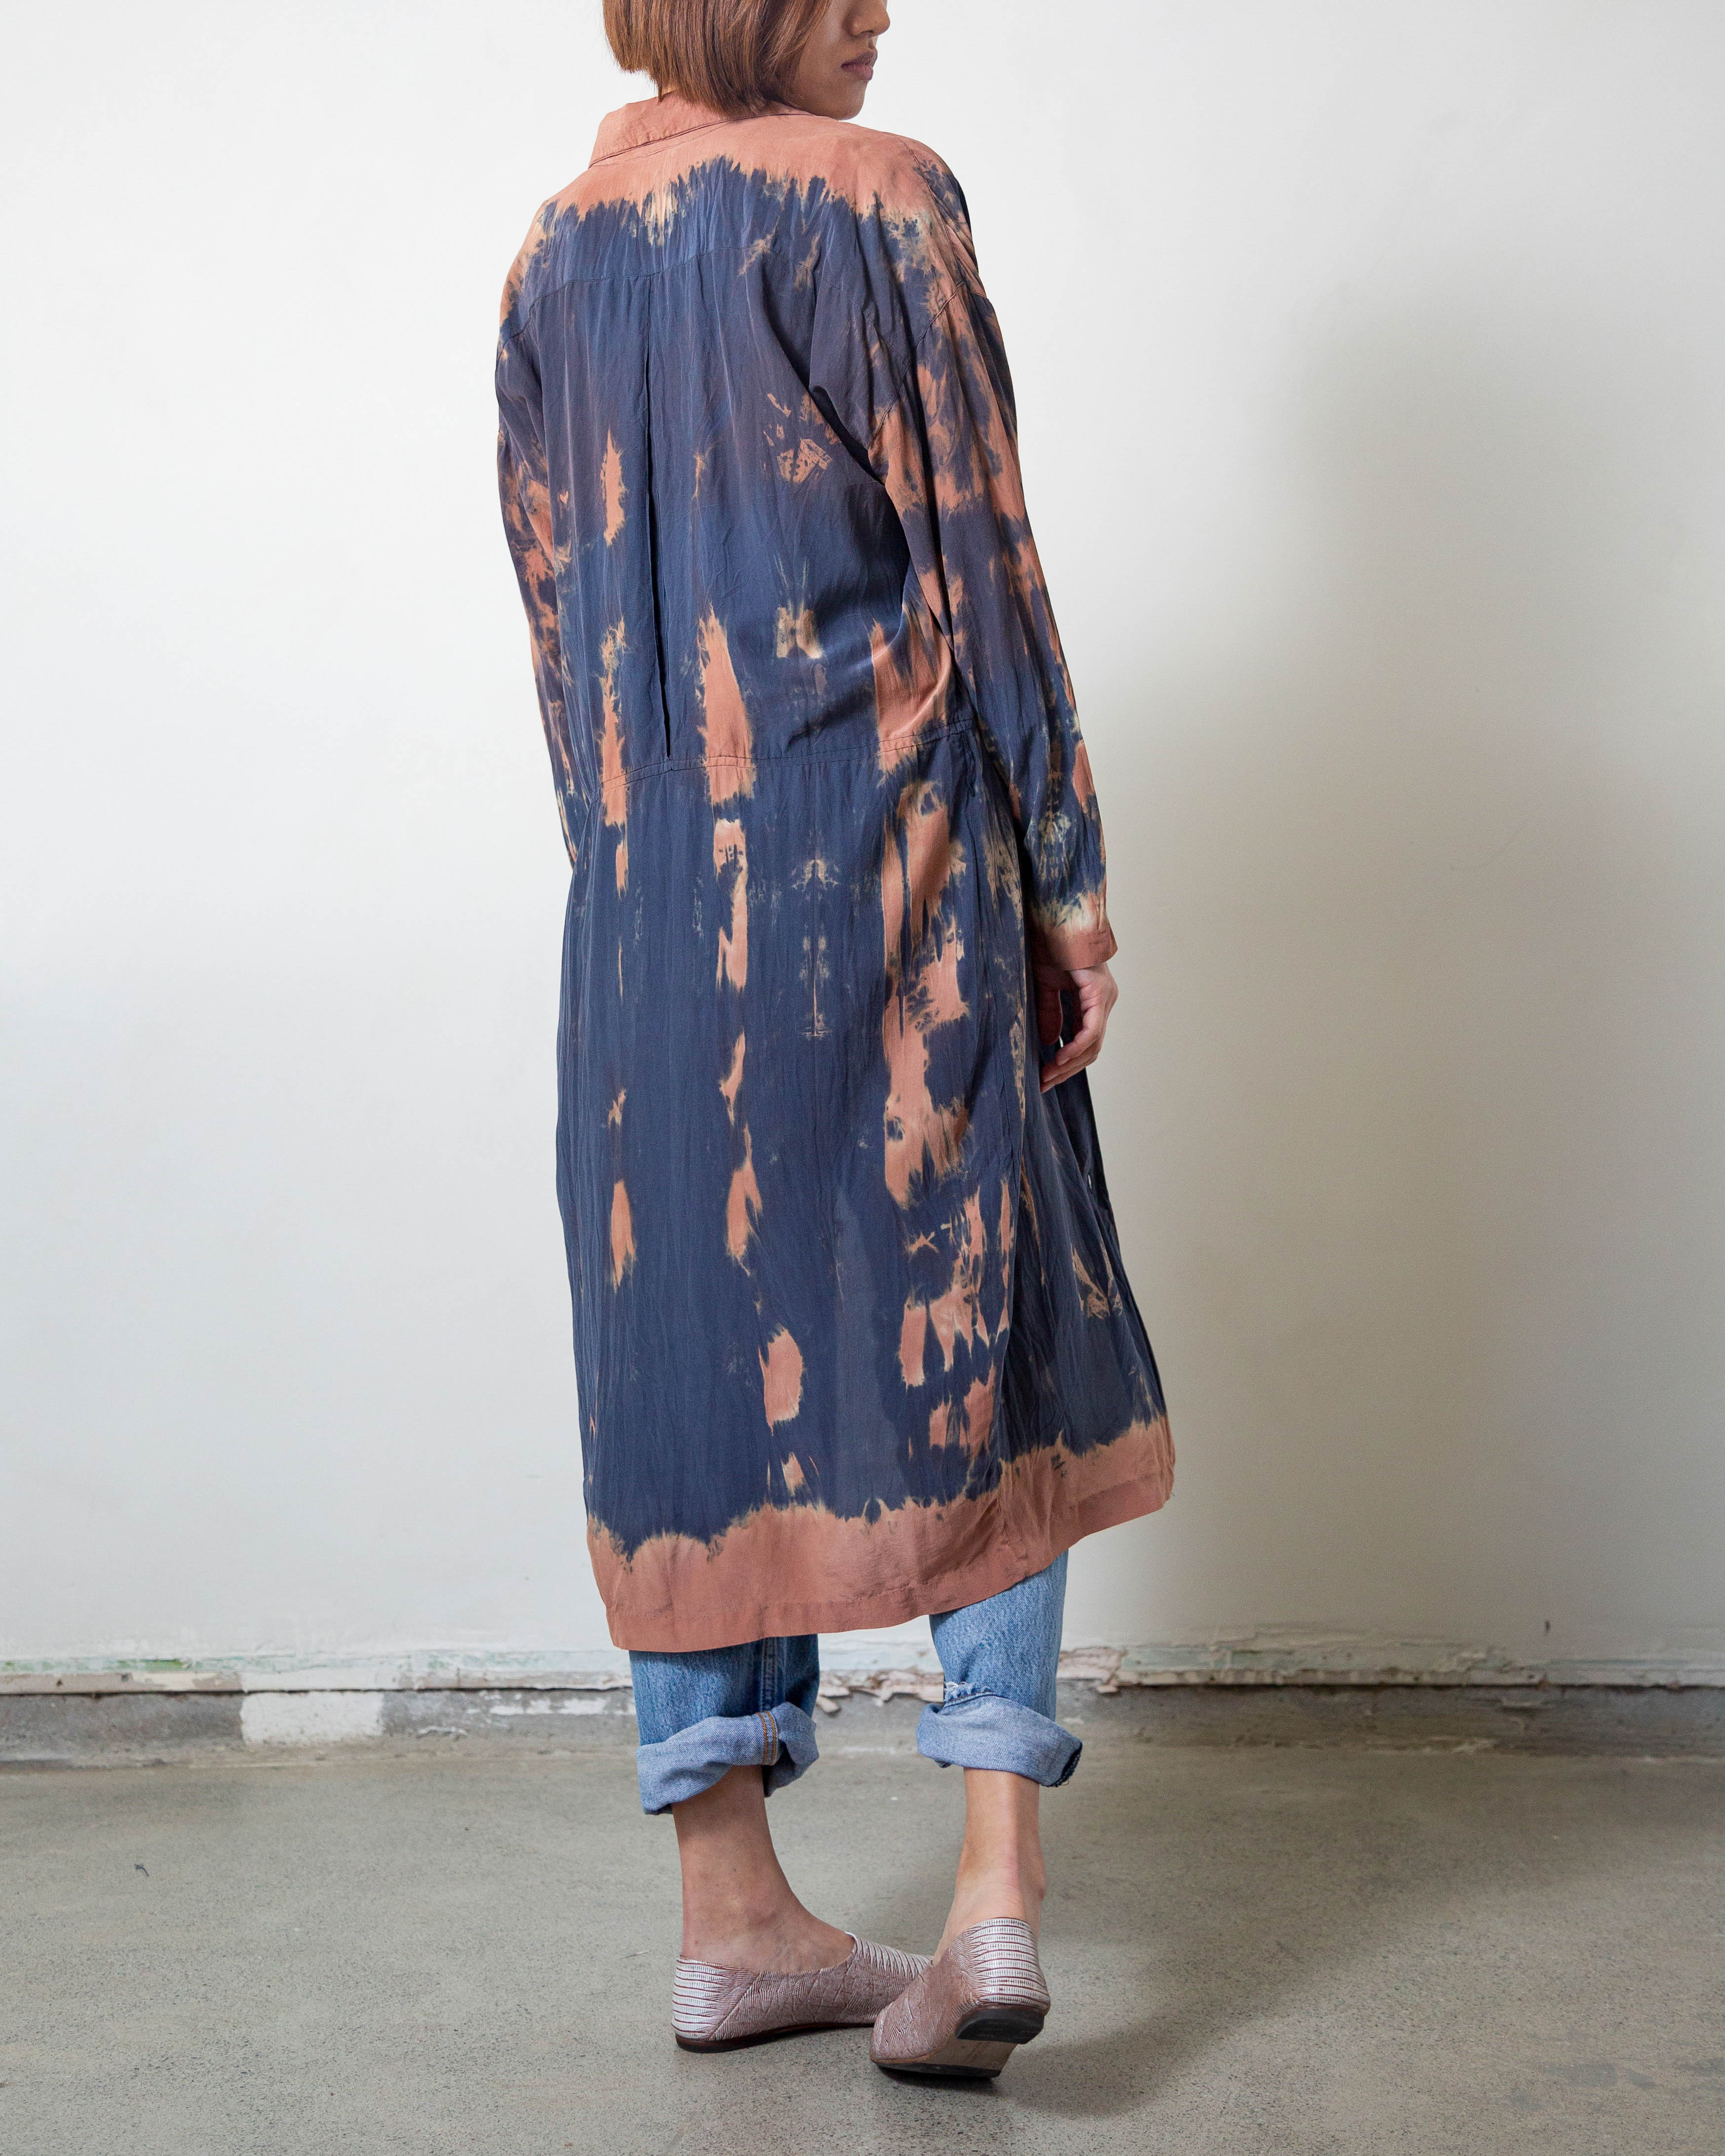 Tied and Naturally Dyed Silk Shirtdress